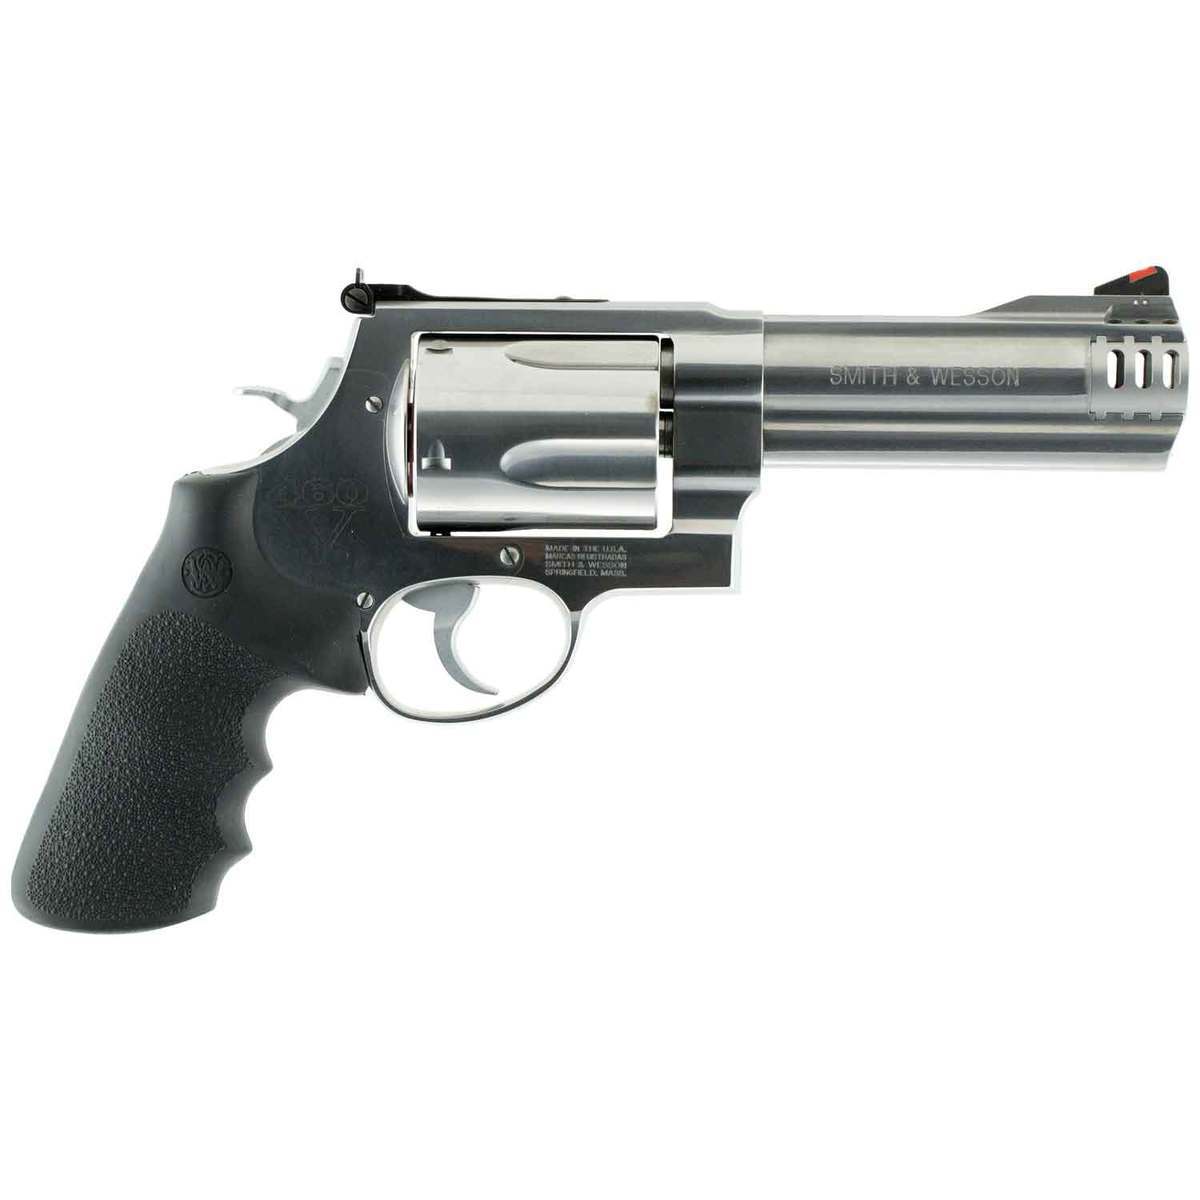 Smith & Wesson Model 460V 460 S&W 5in Stainless Revolver - 5 Rounds ...